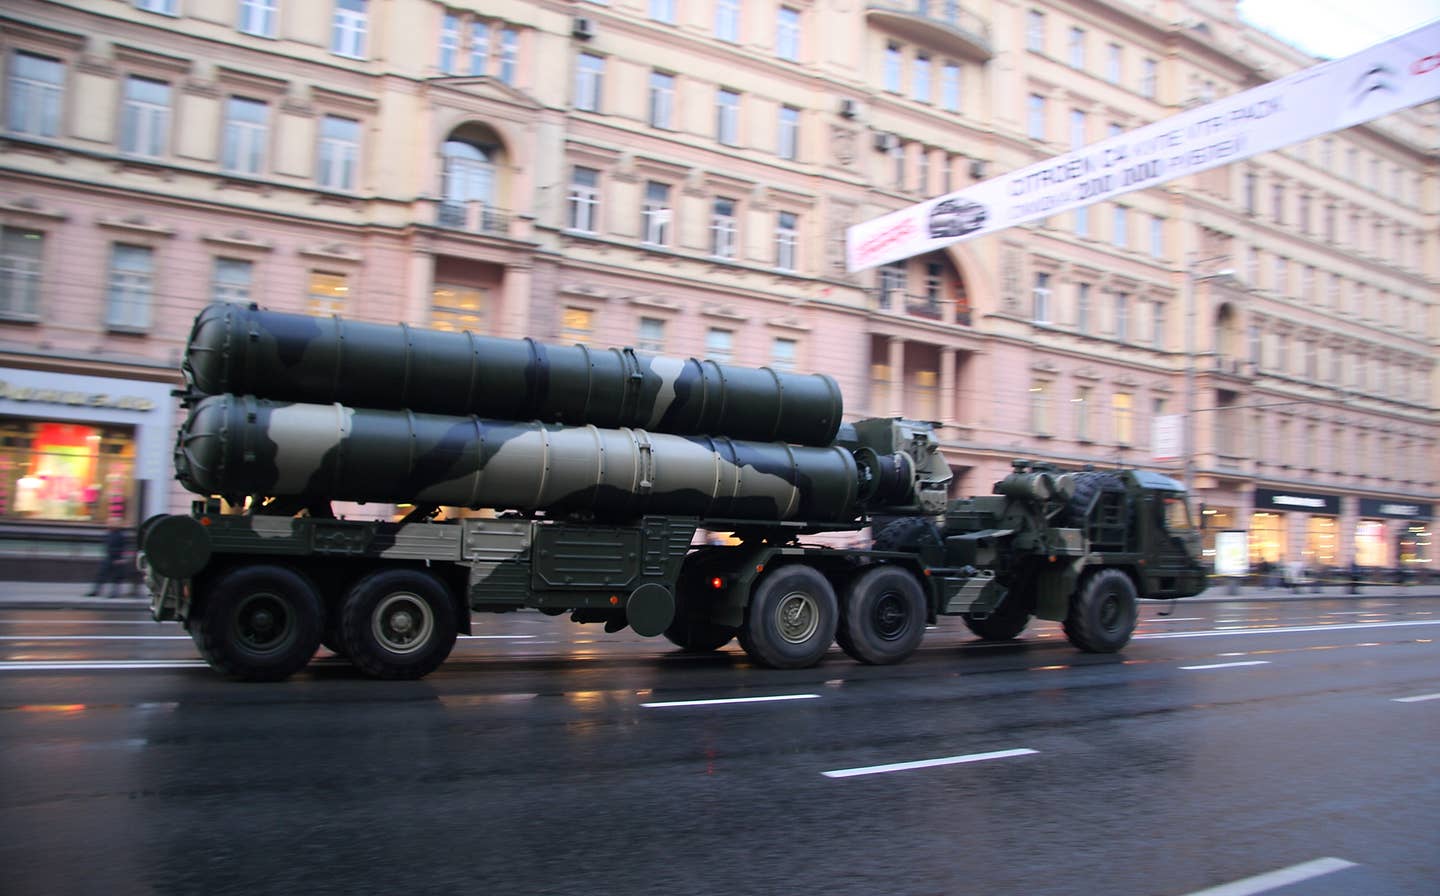 Russian S-400 system during a rehearsal for Russia's 2009 Victory Day parade in Moscow. <em>Credit: Vitaly V. Kuzmin/Wikimedia Commons</em>